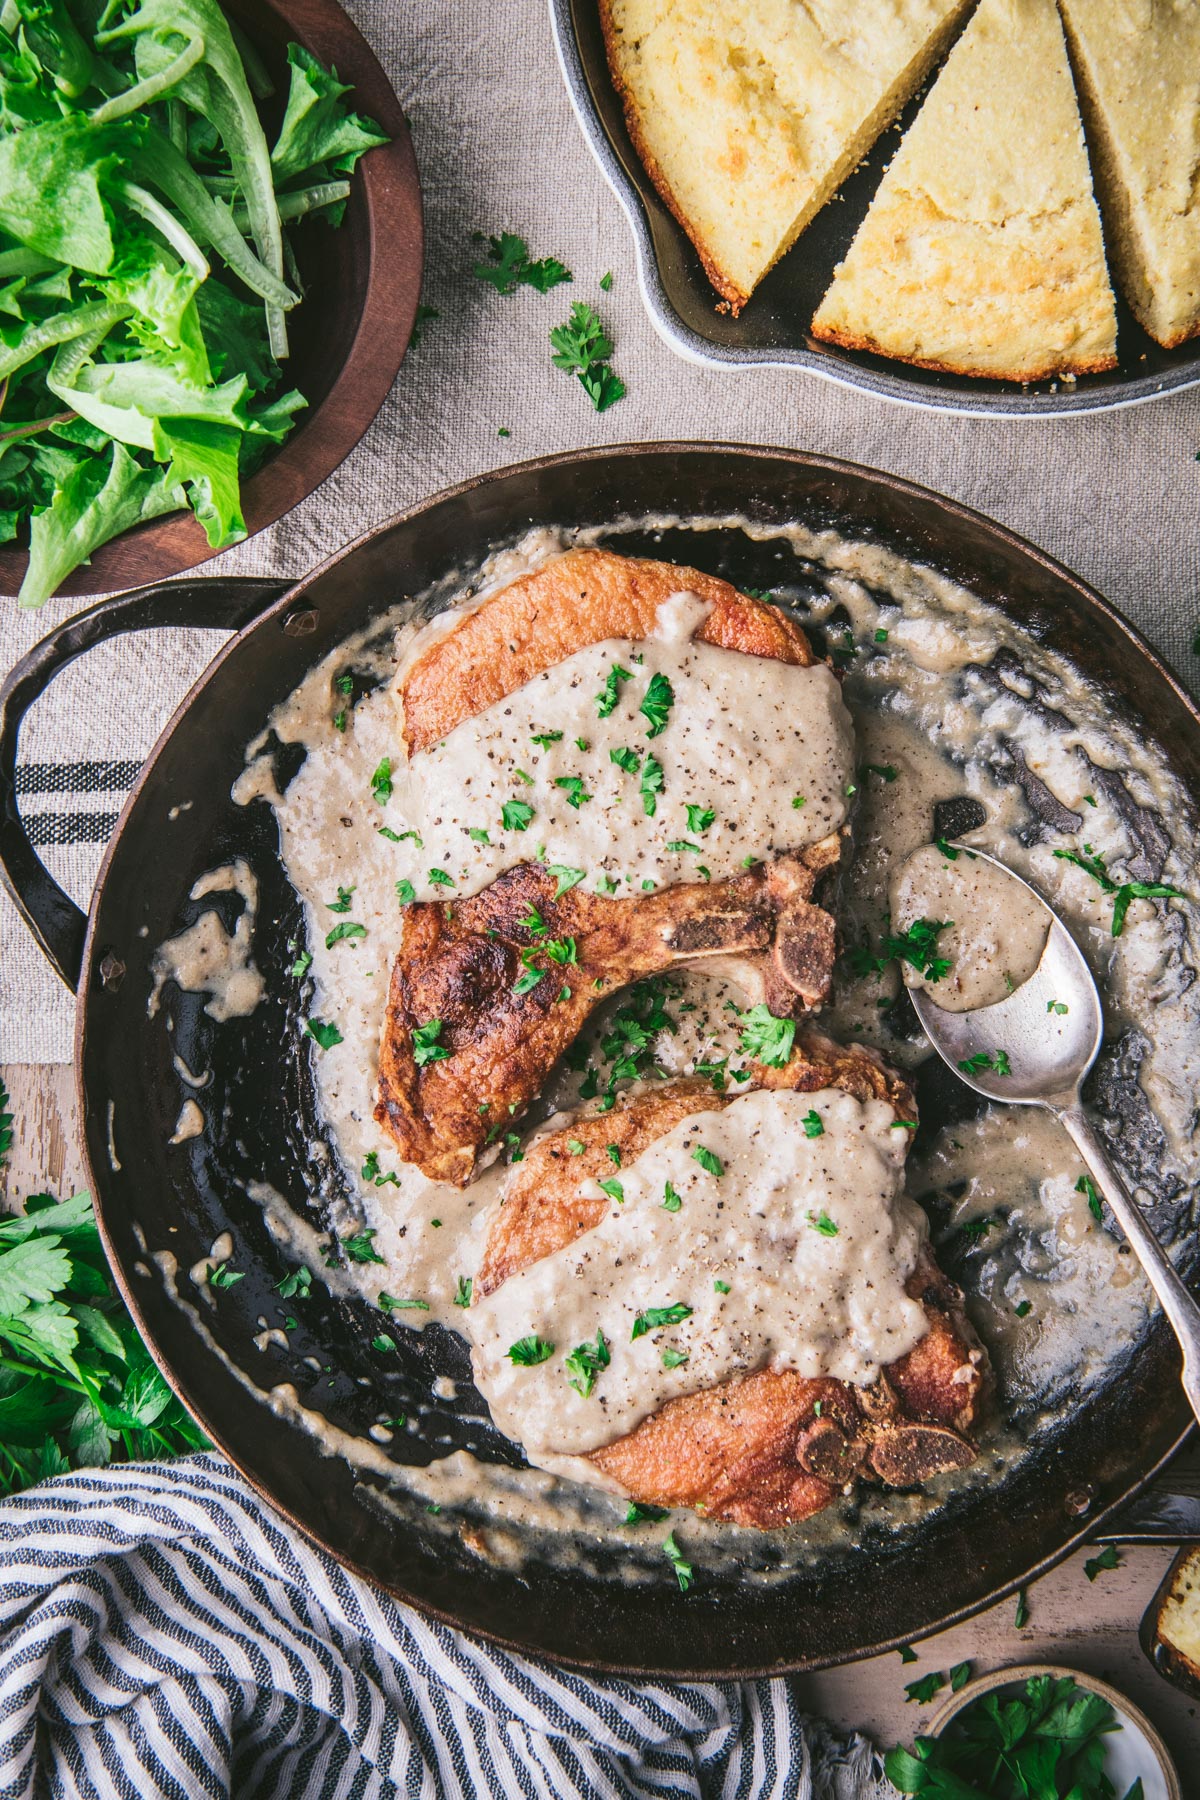 Skillet of pork chops and gravy on a dinner table